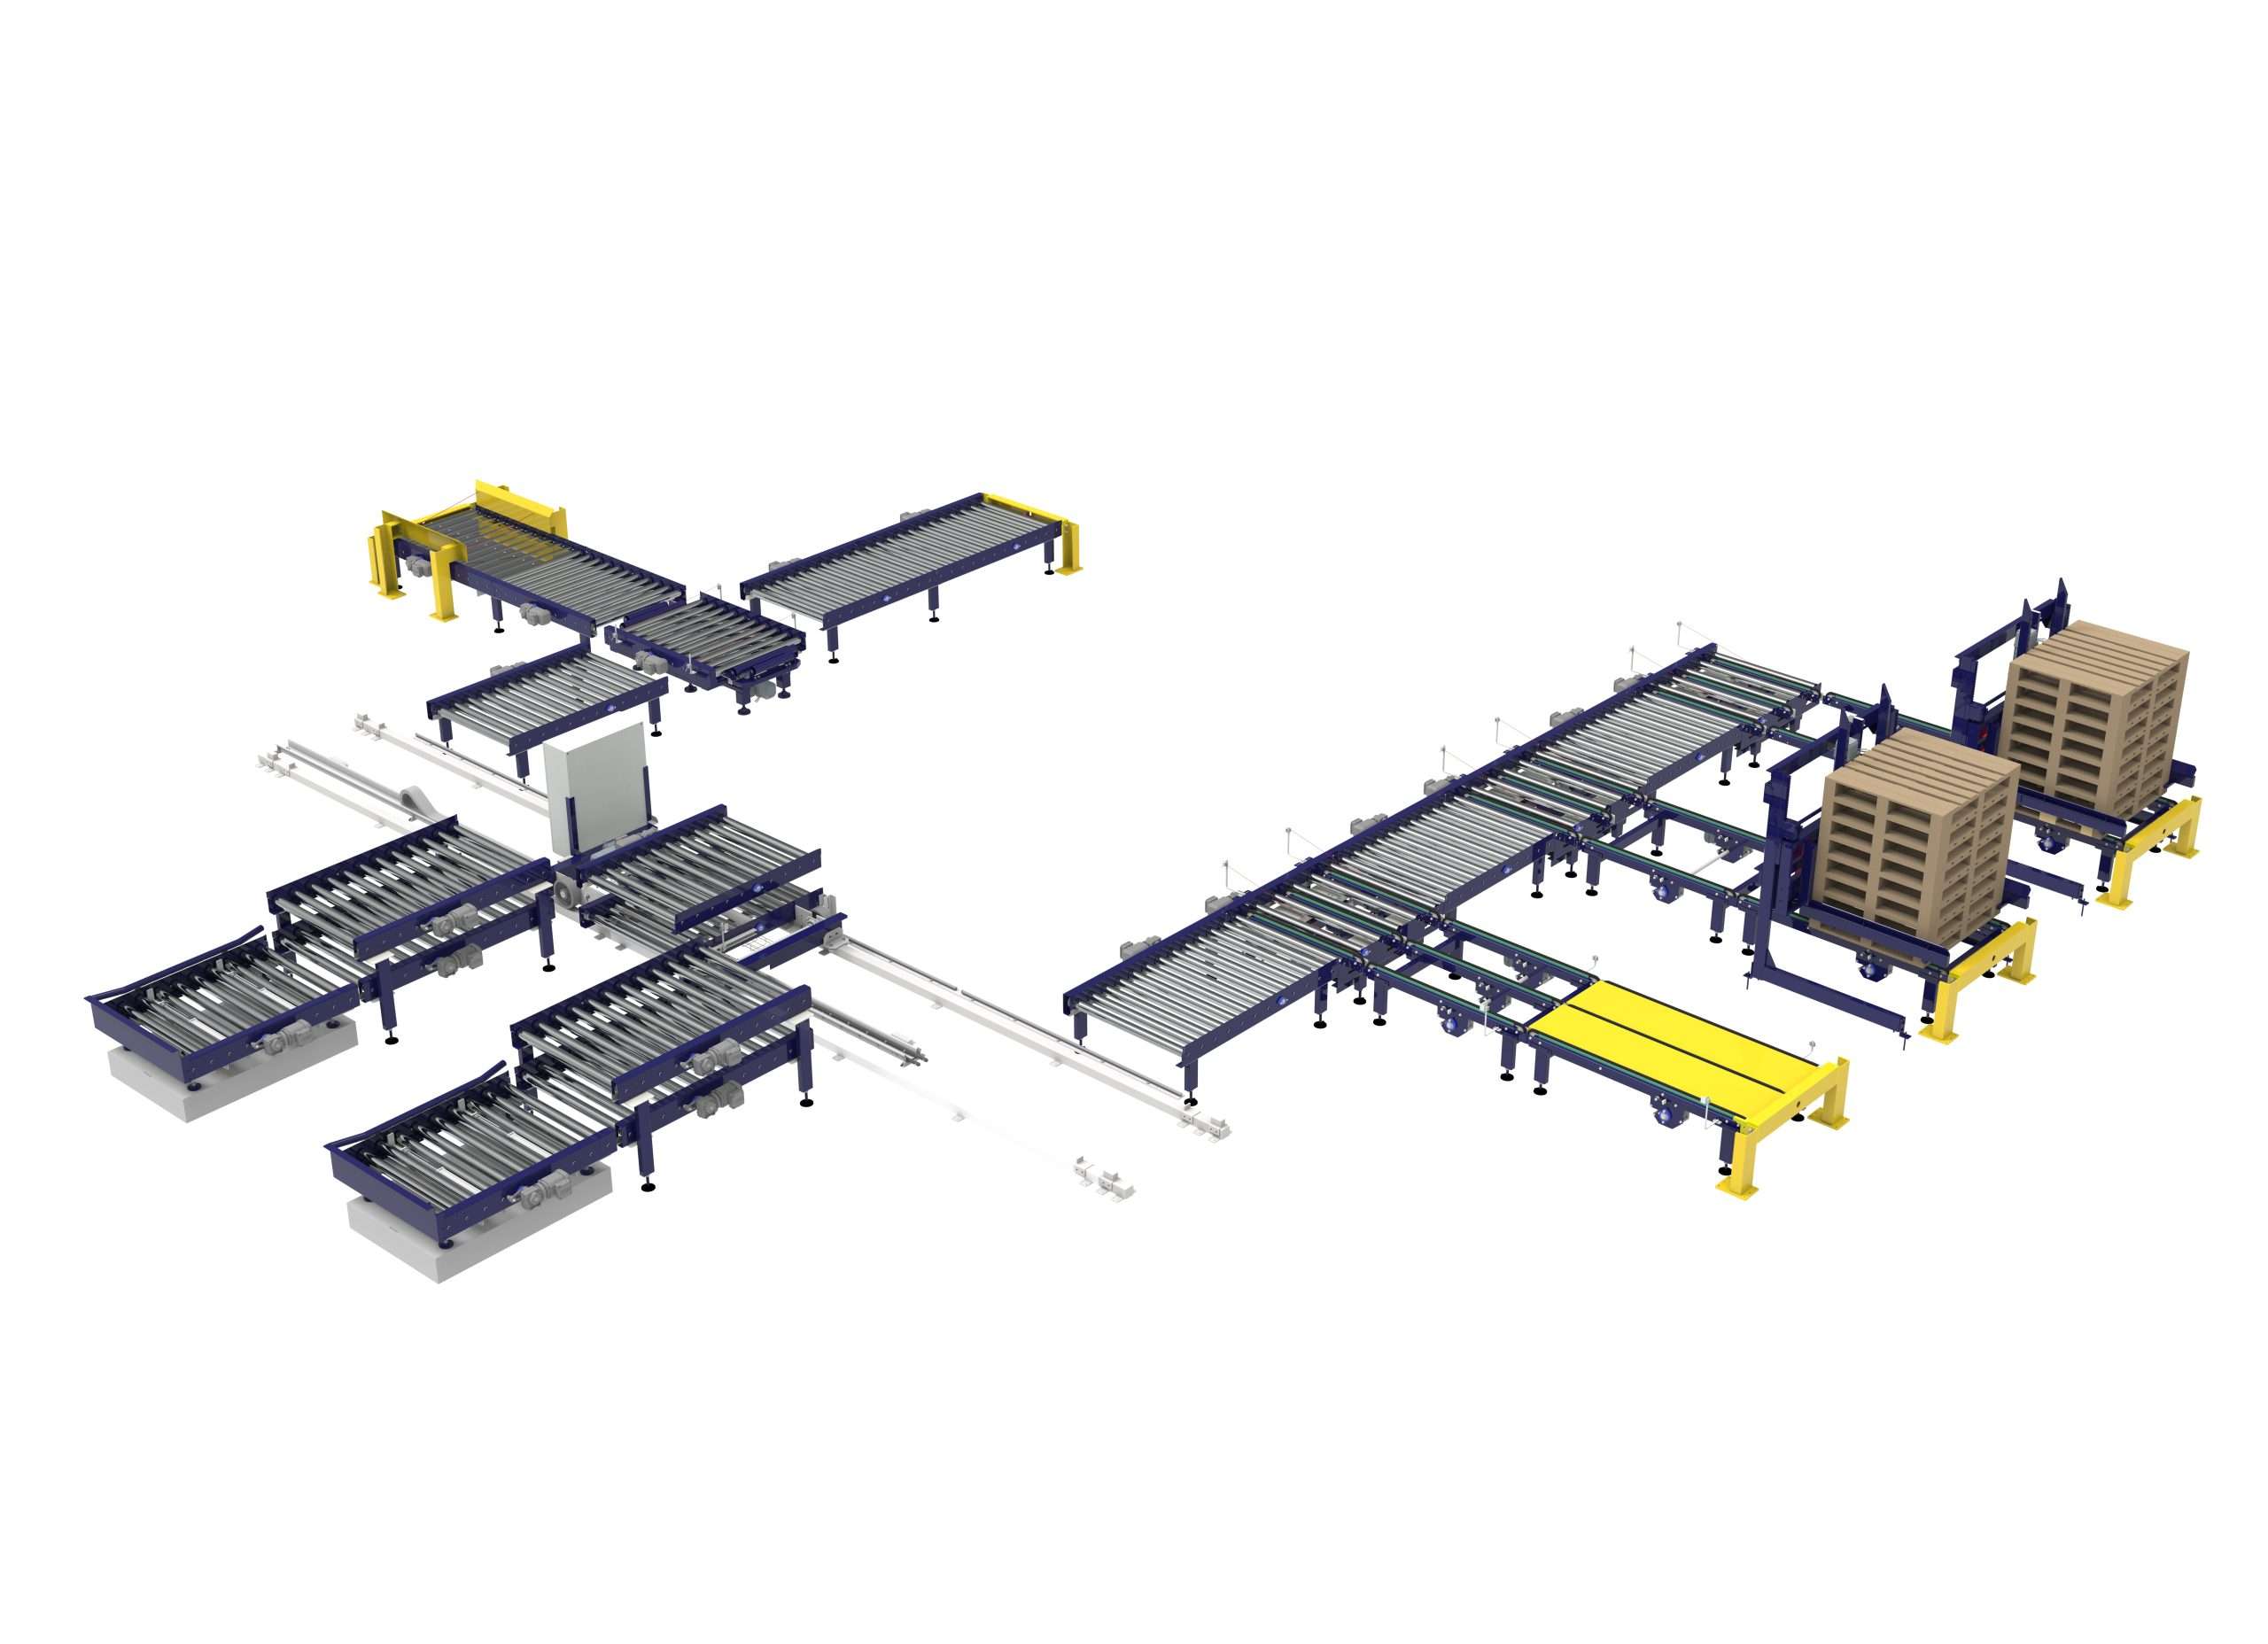 This is the design of a conveyor system we installed for one of our customers